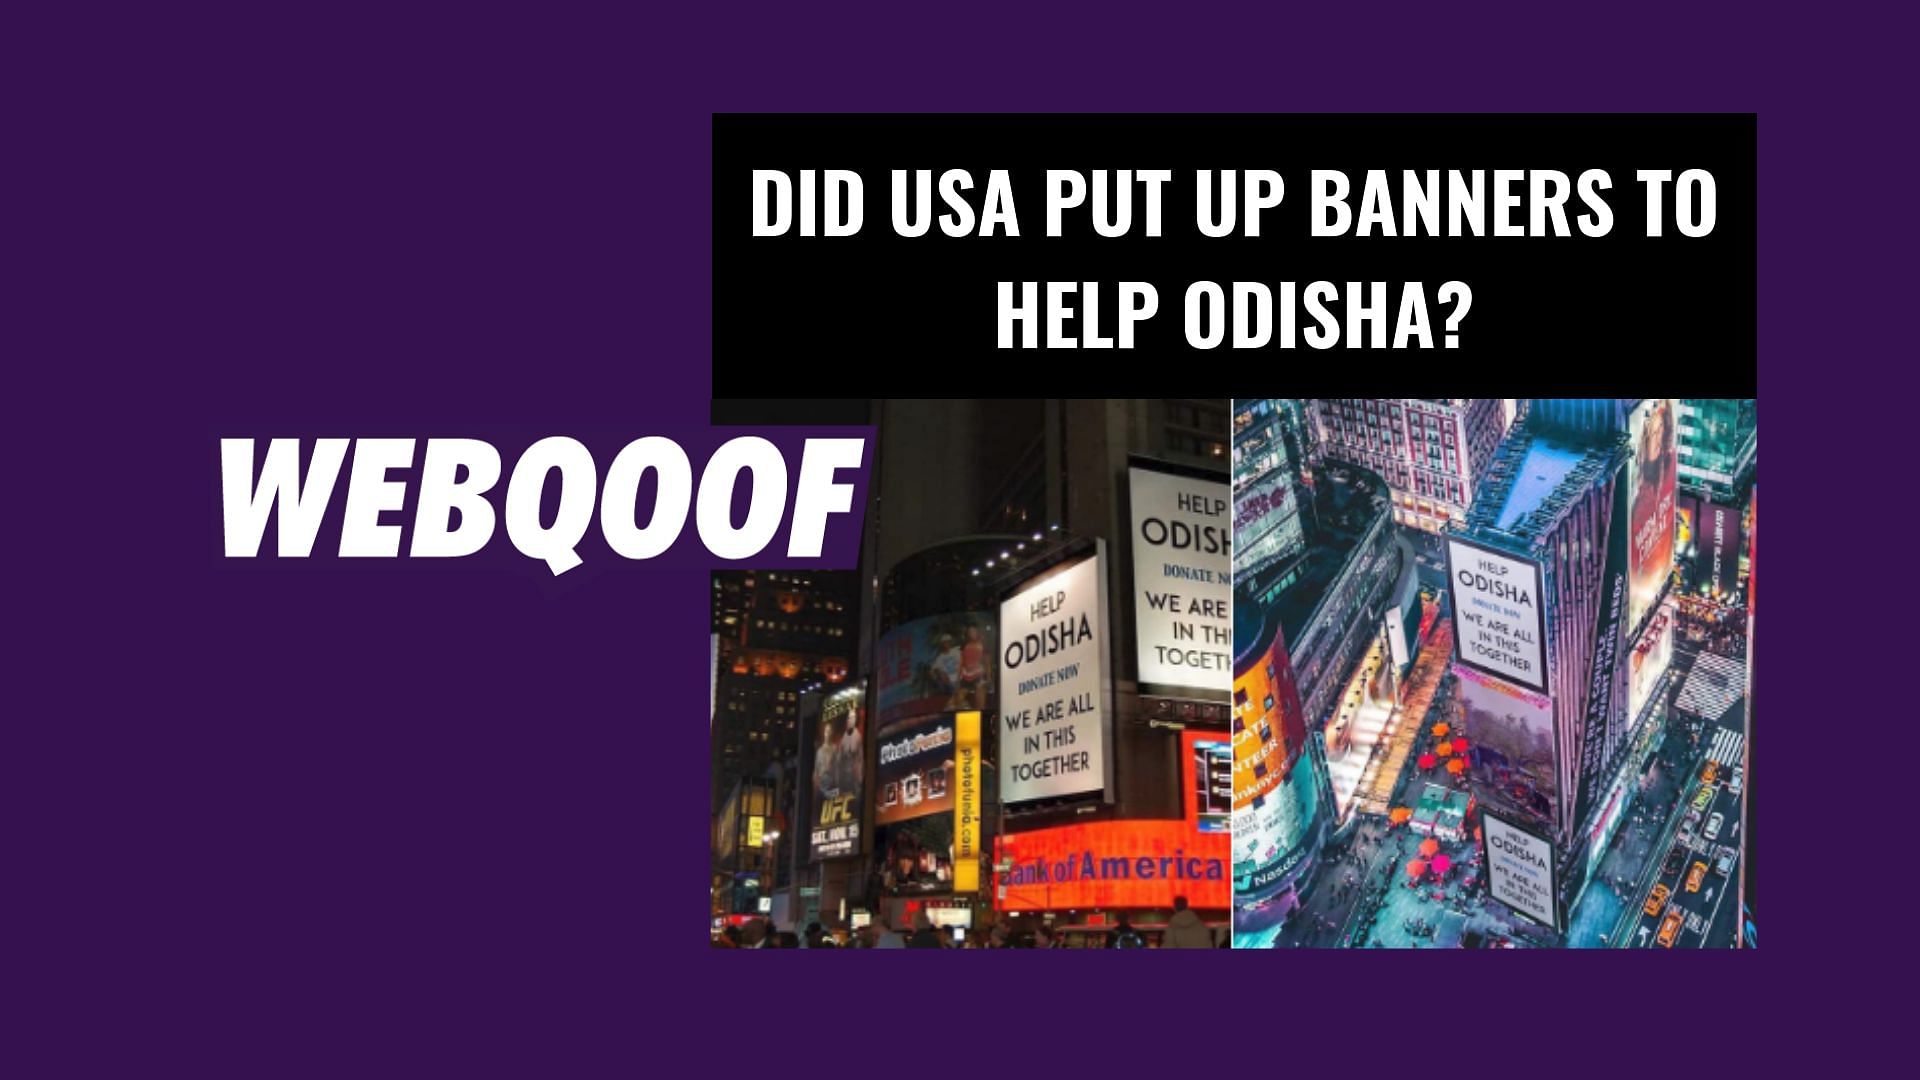 A viral image on social media falsely claims that places in the United States of America put up banners to help Odisha.